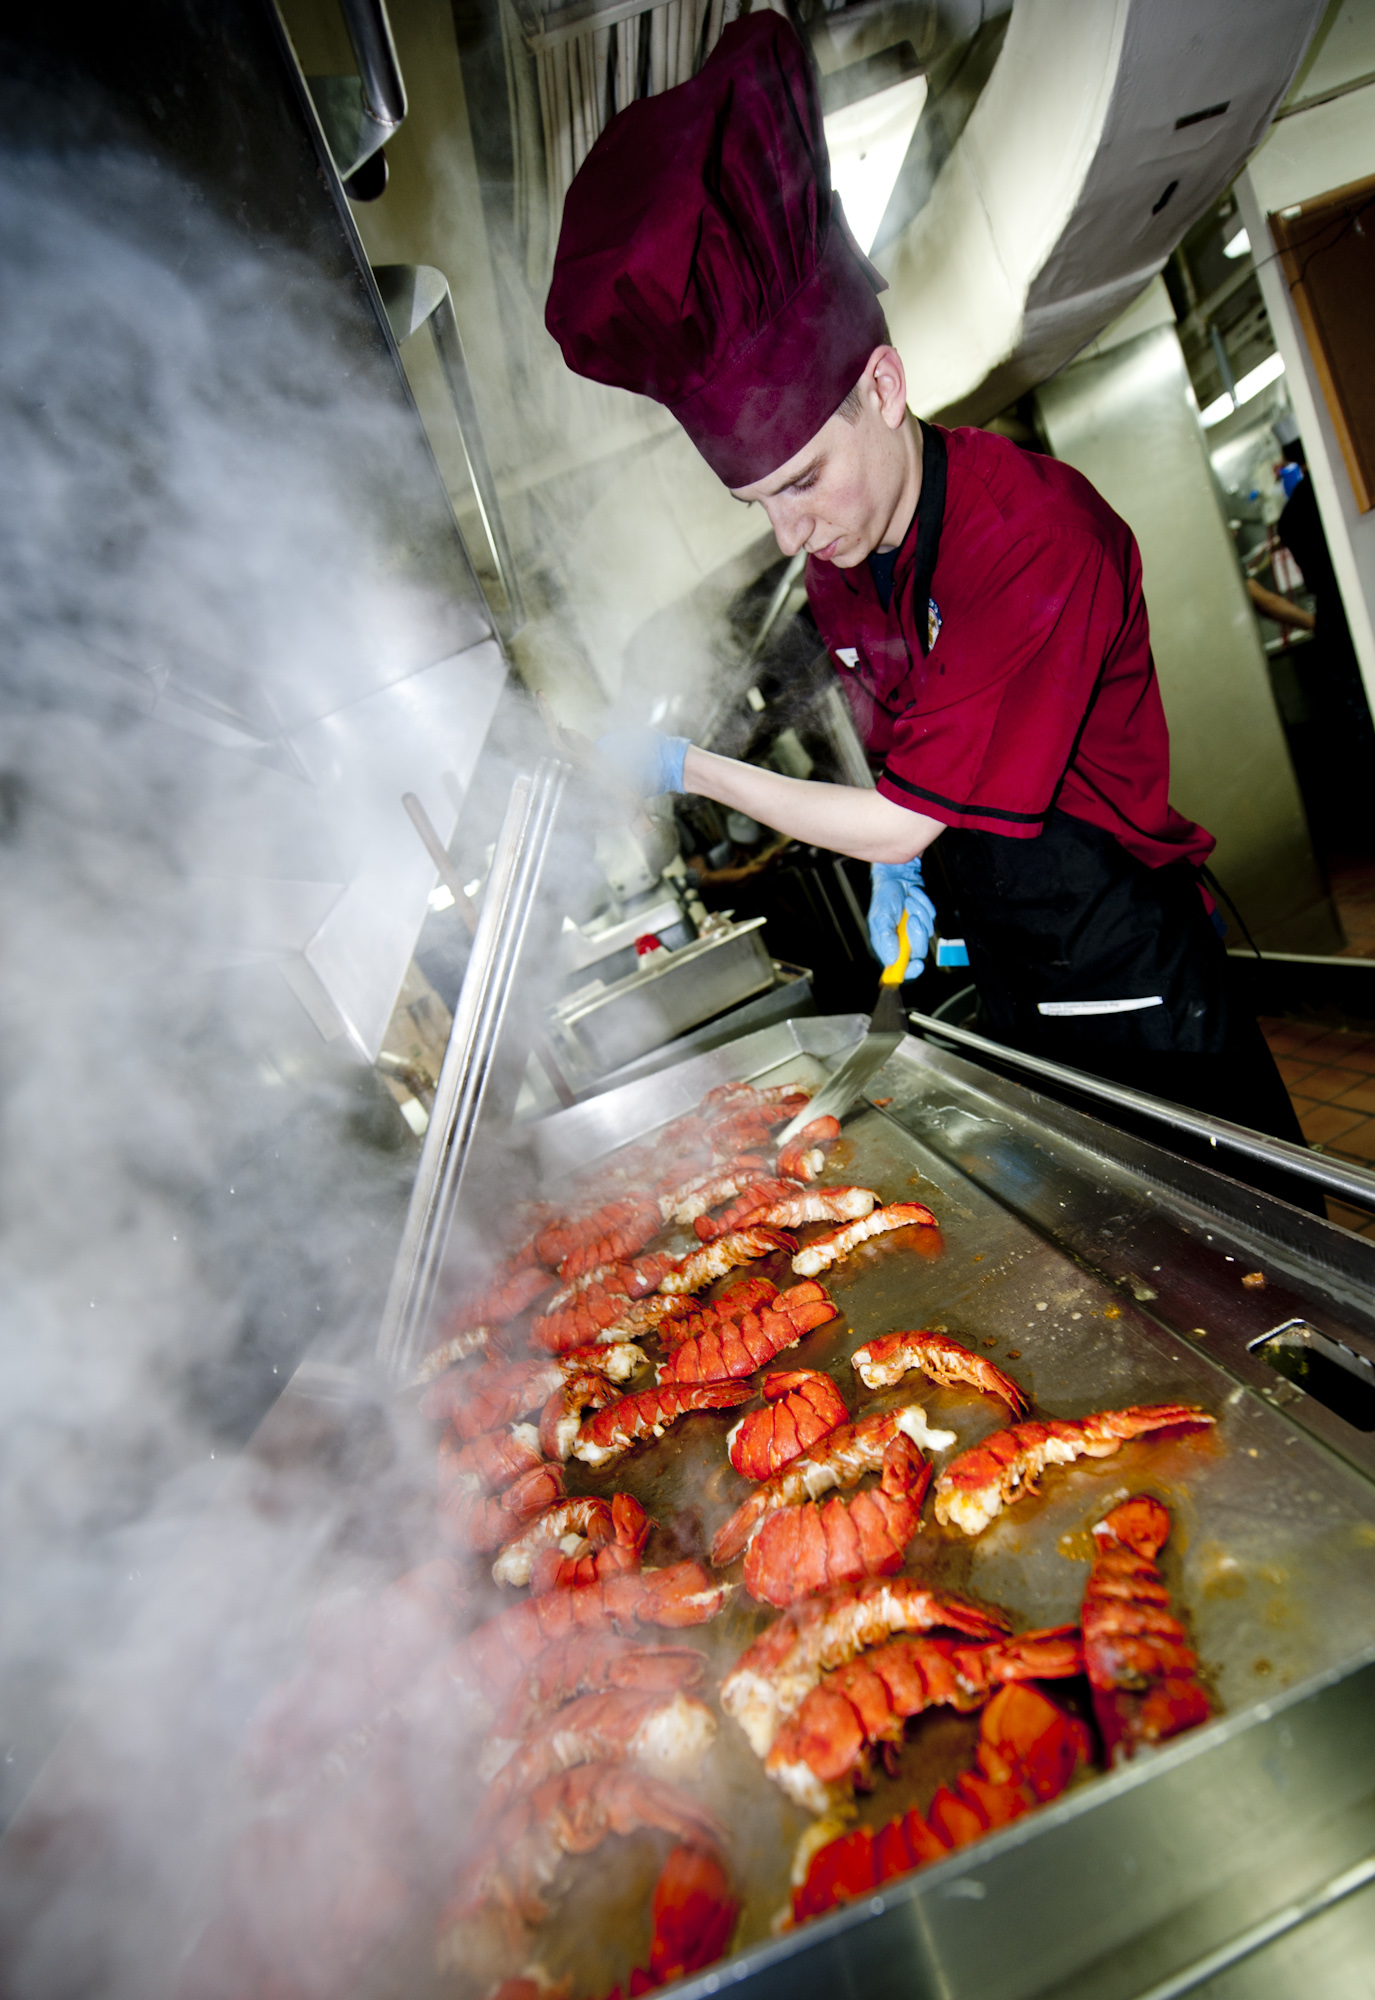 US Navy 111220-N-OY799-224 Culinary Specialist Seaman Jon Ketola grills lobster tails in preparation for the Christmas meal in the aft galley aboar